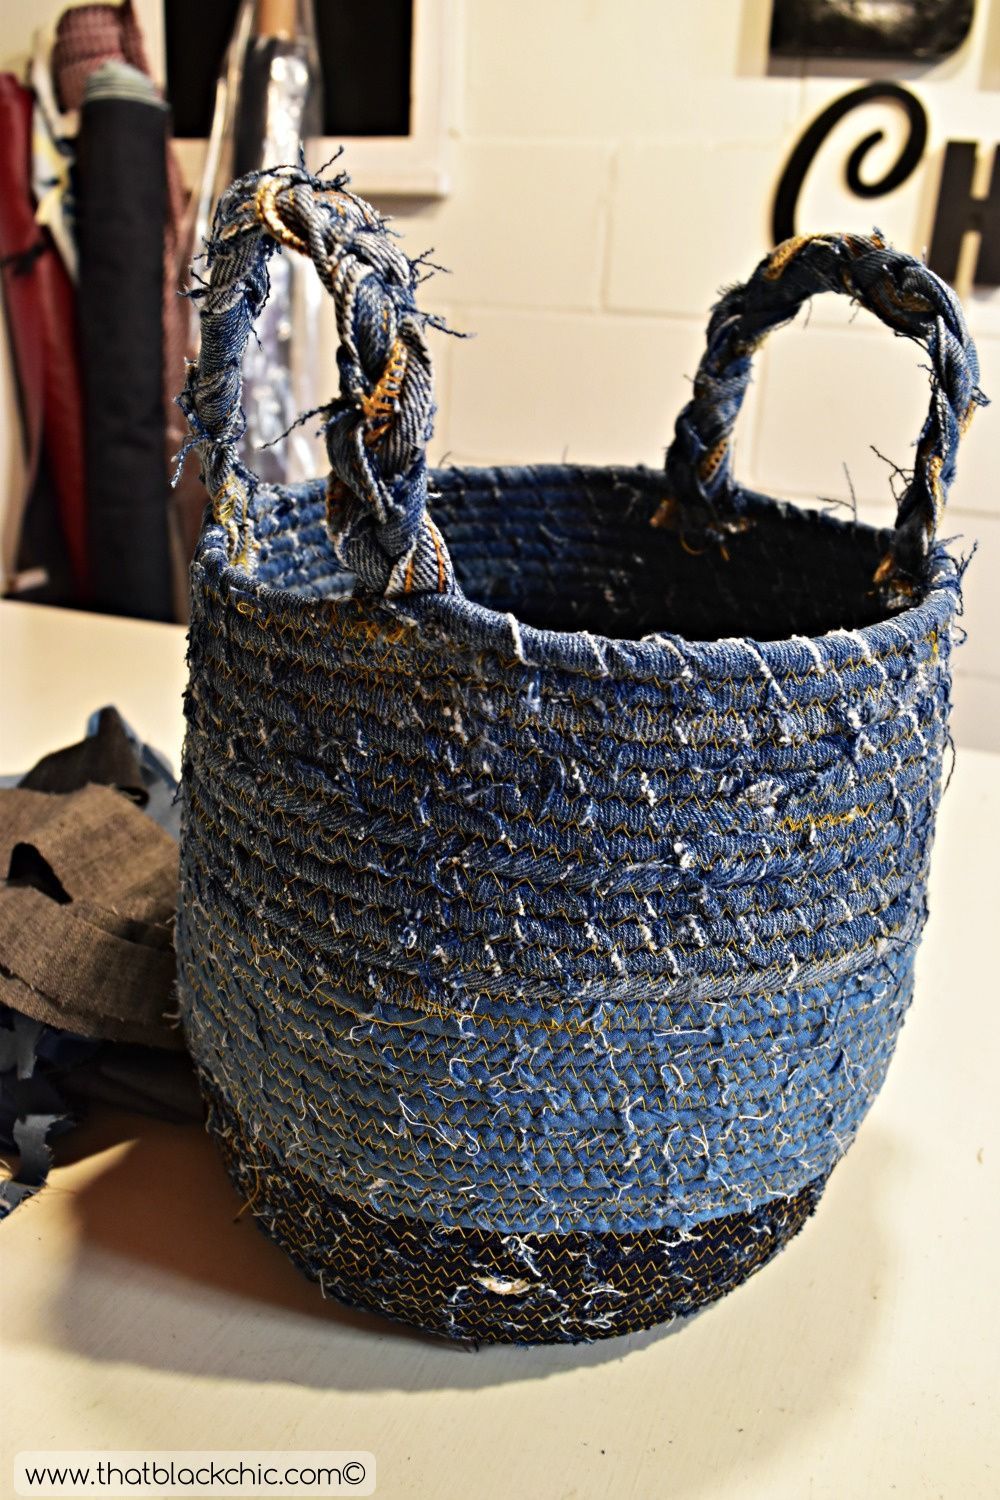 Make a fabric basket any size you need with this DIY Rope Basket made from Recycled Denim tutorial made by That Black Chic.